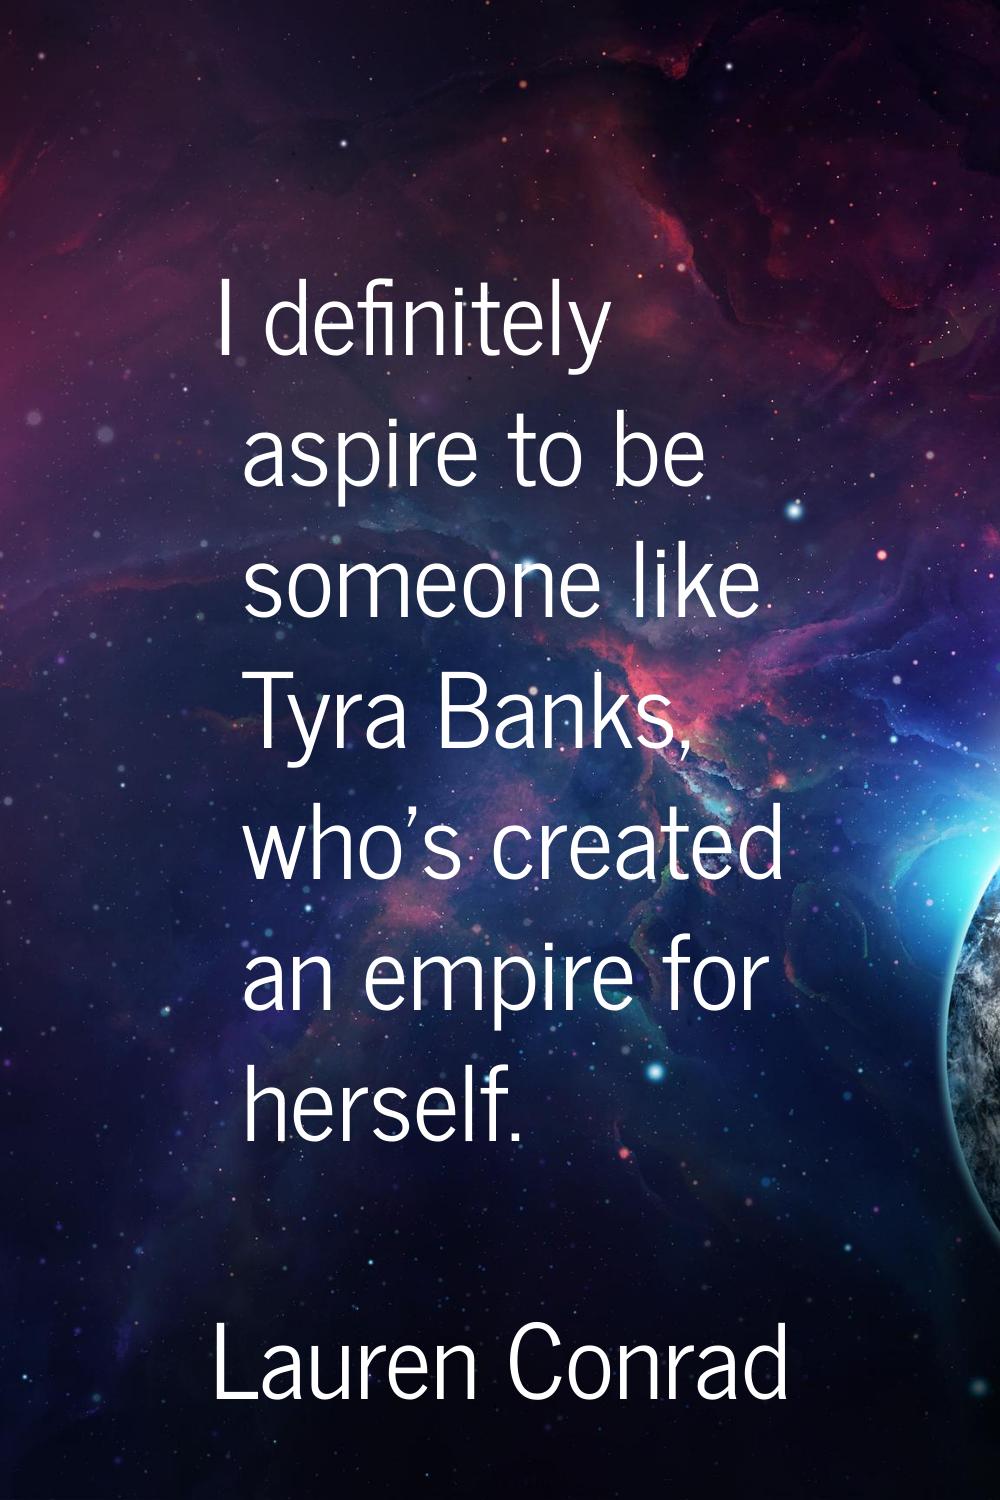 I definitely aspire to be someone like Tyra Banks, who's created an empire for herself.